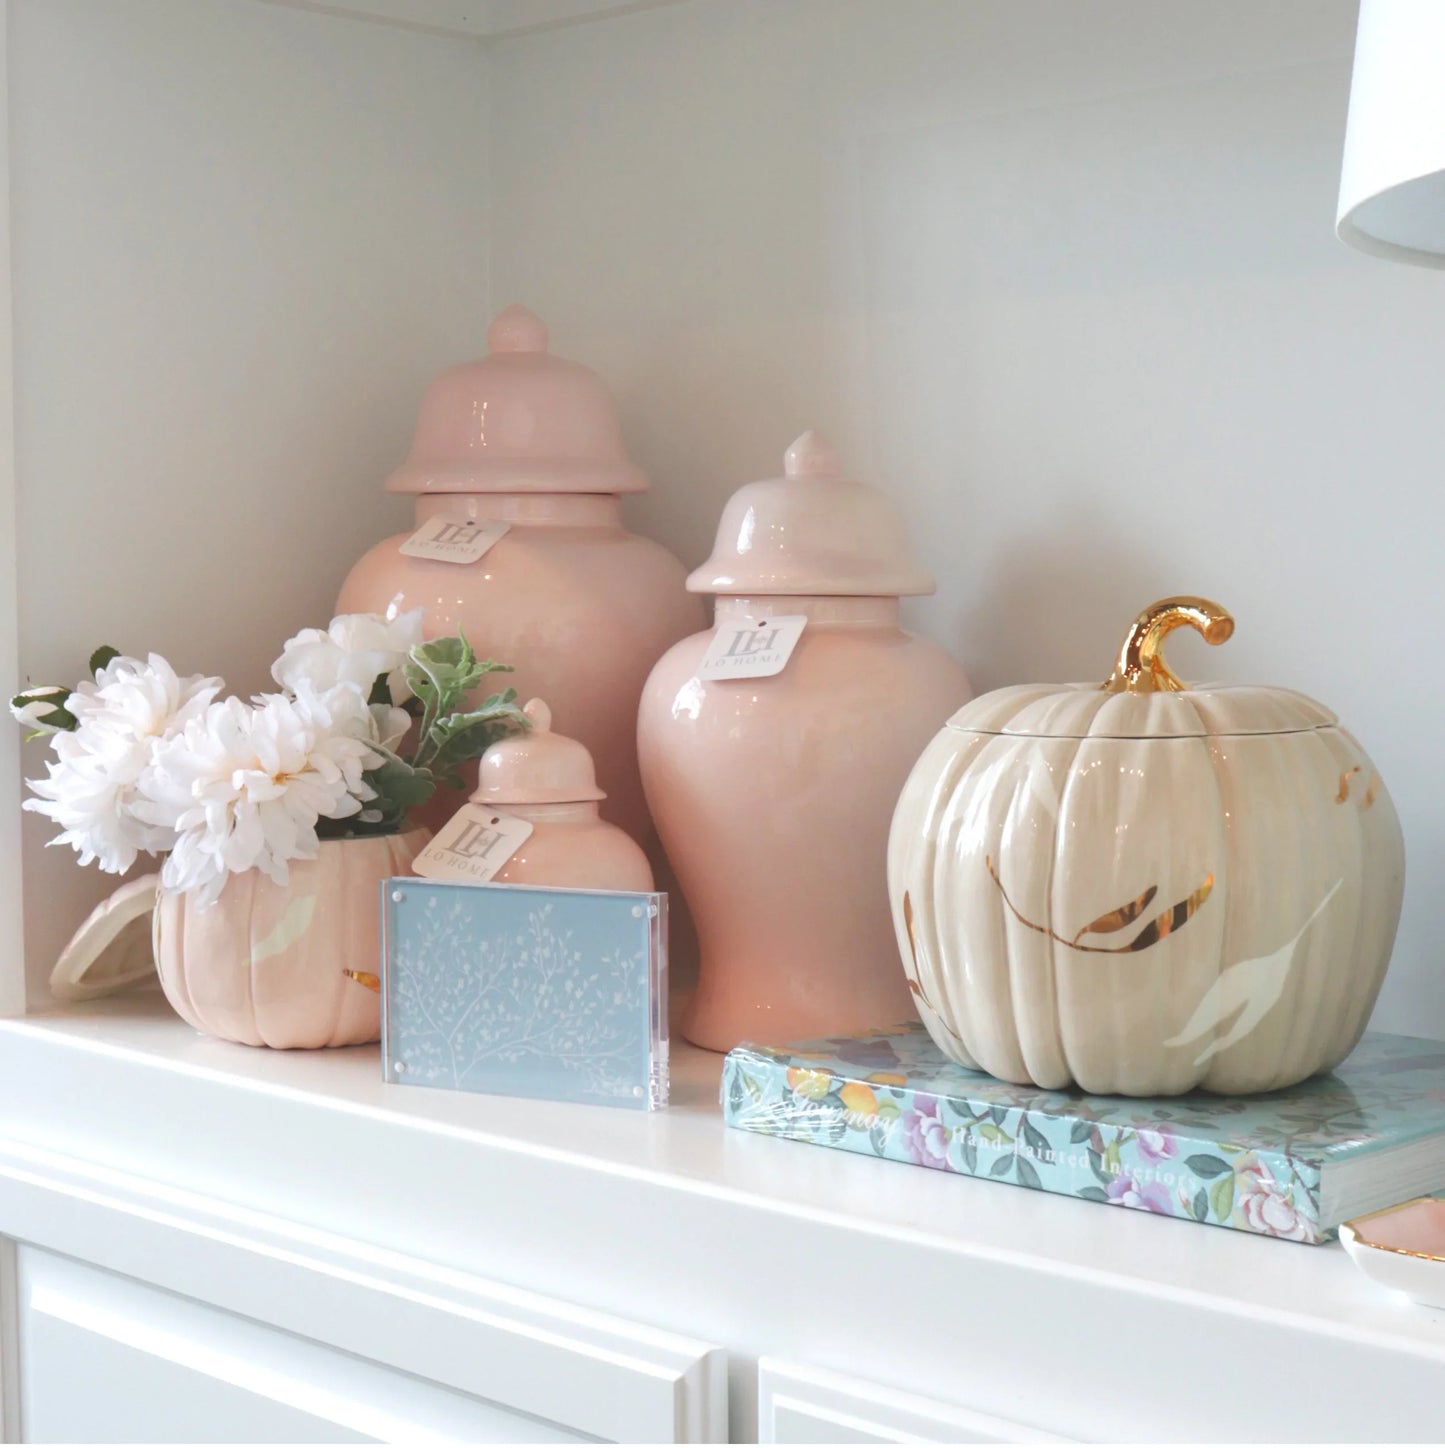 Layered Leaves Pumpkin Jars with 22K Gold Accents in Pink | Wholesale